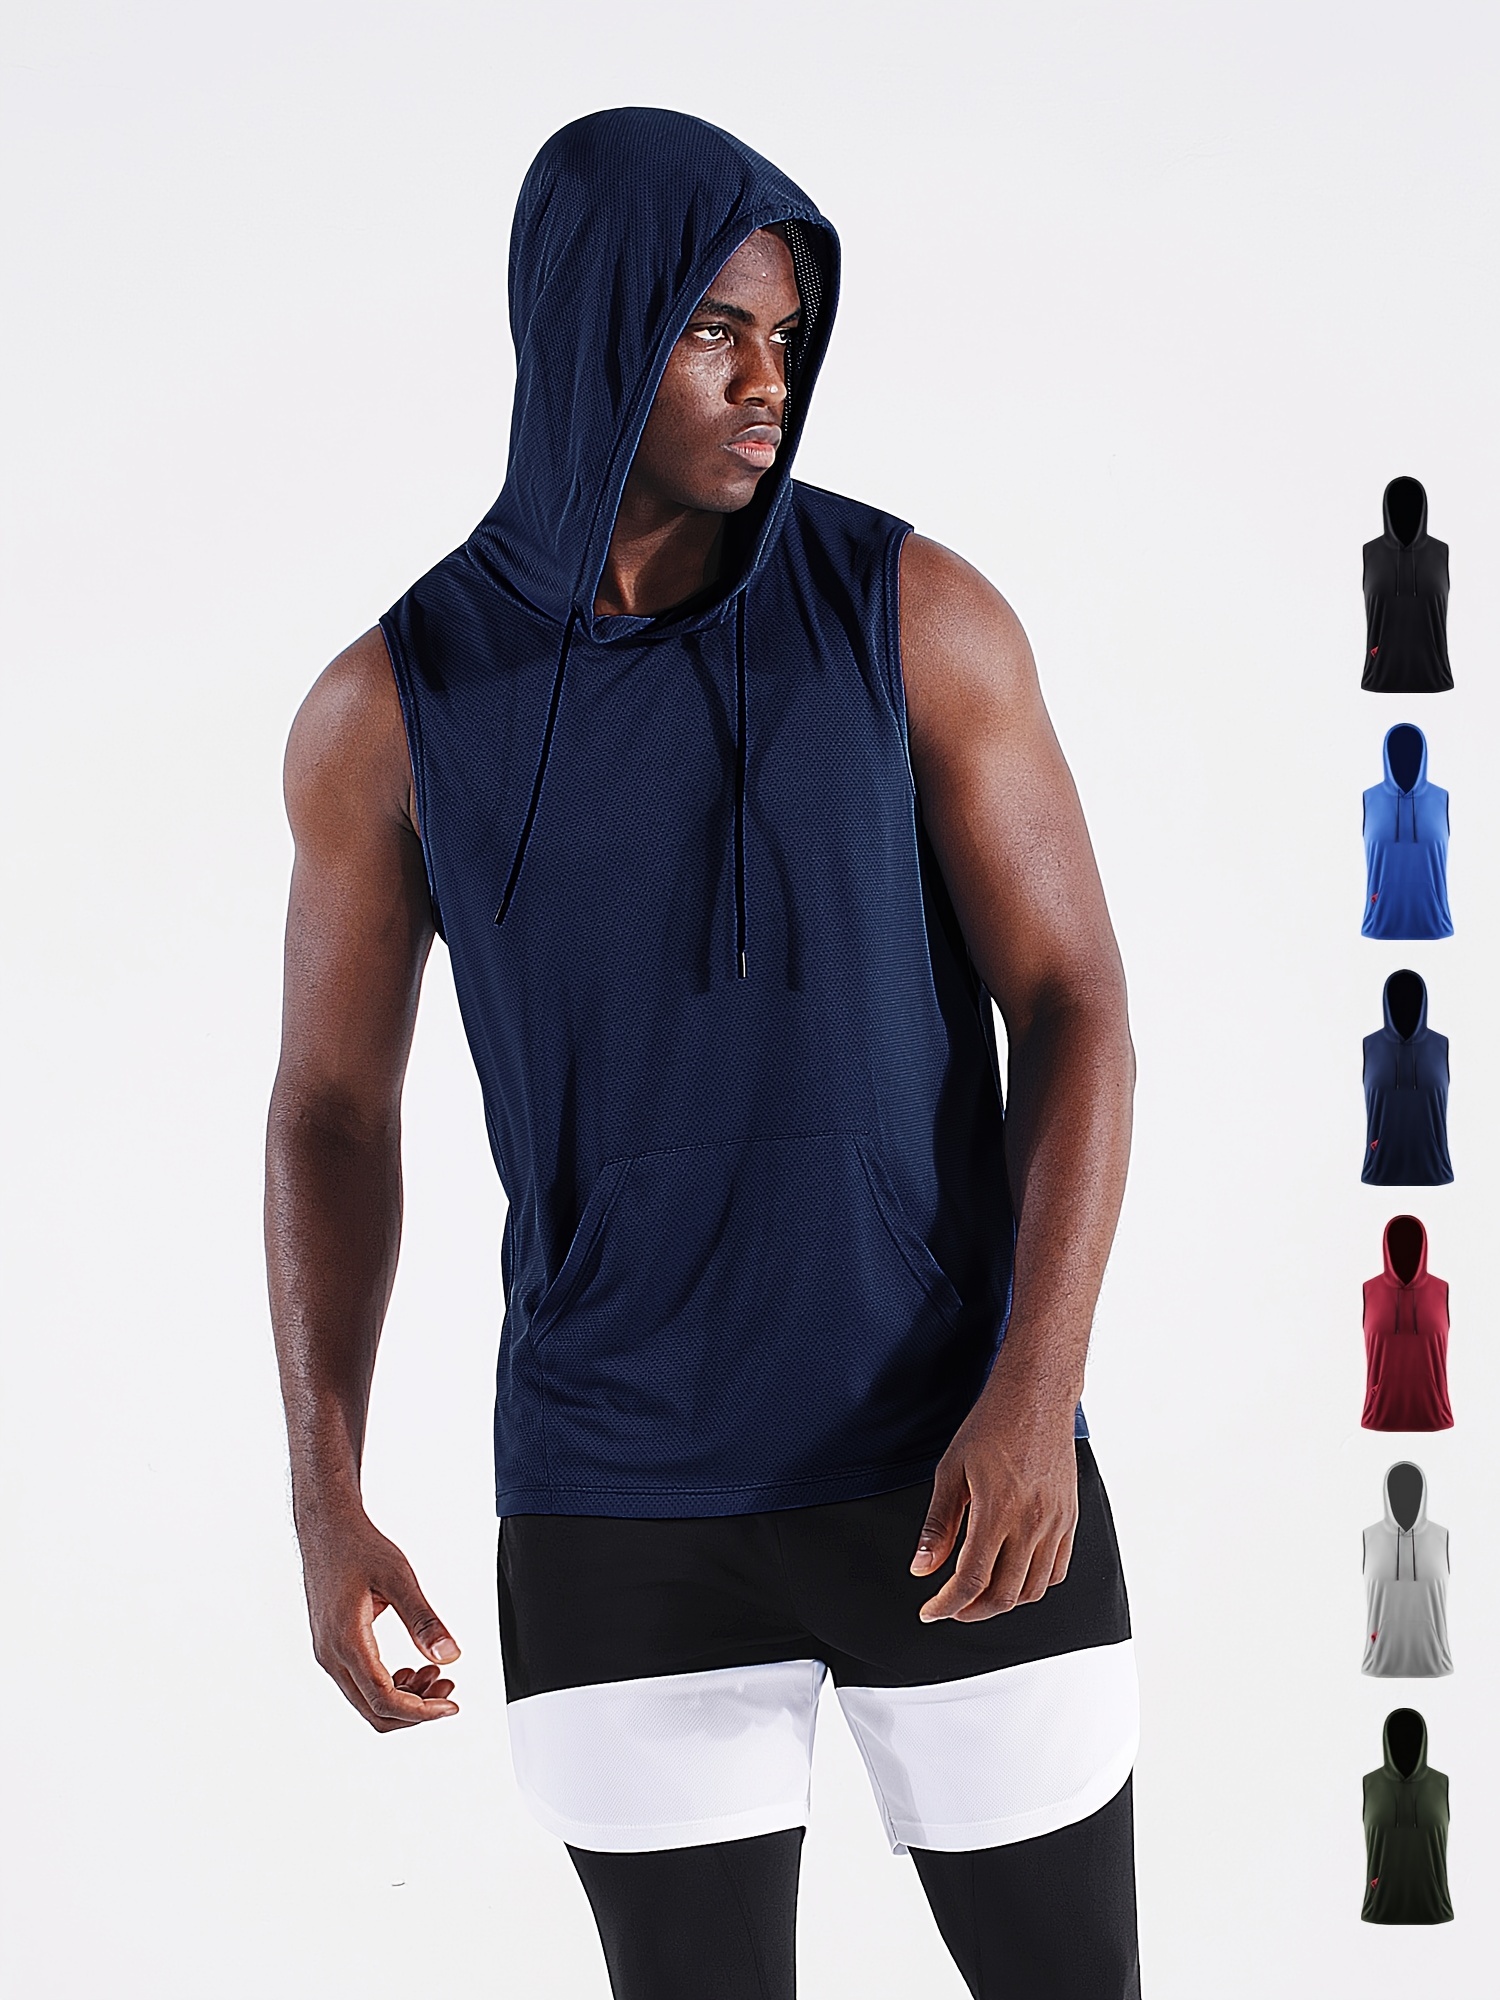 Hip Hop Mens Hooded Mens Sleeveless Tops With 2 Layer Fitness Singlet And  Ripped Holes Sleeveless Hip Hop Sport Vest For A Stylish Look From Jilihua,  $14.23